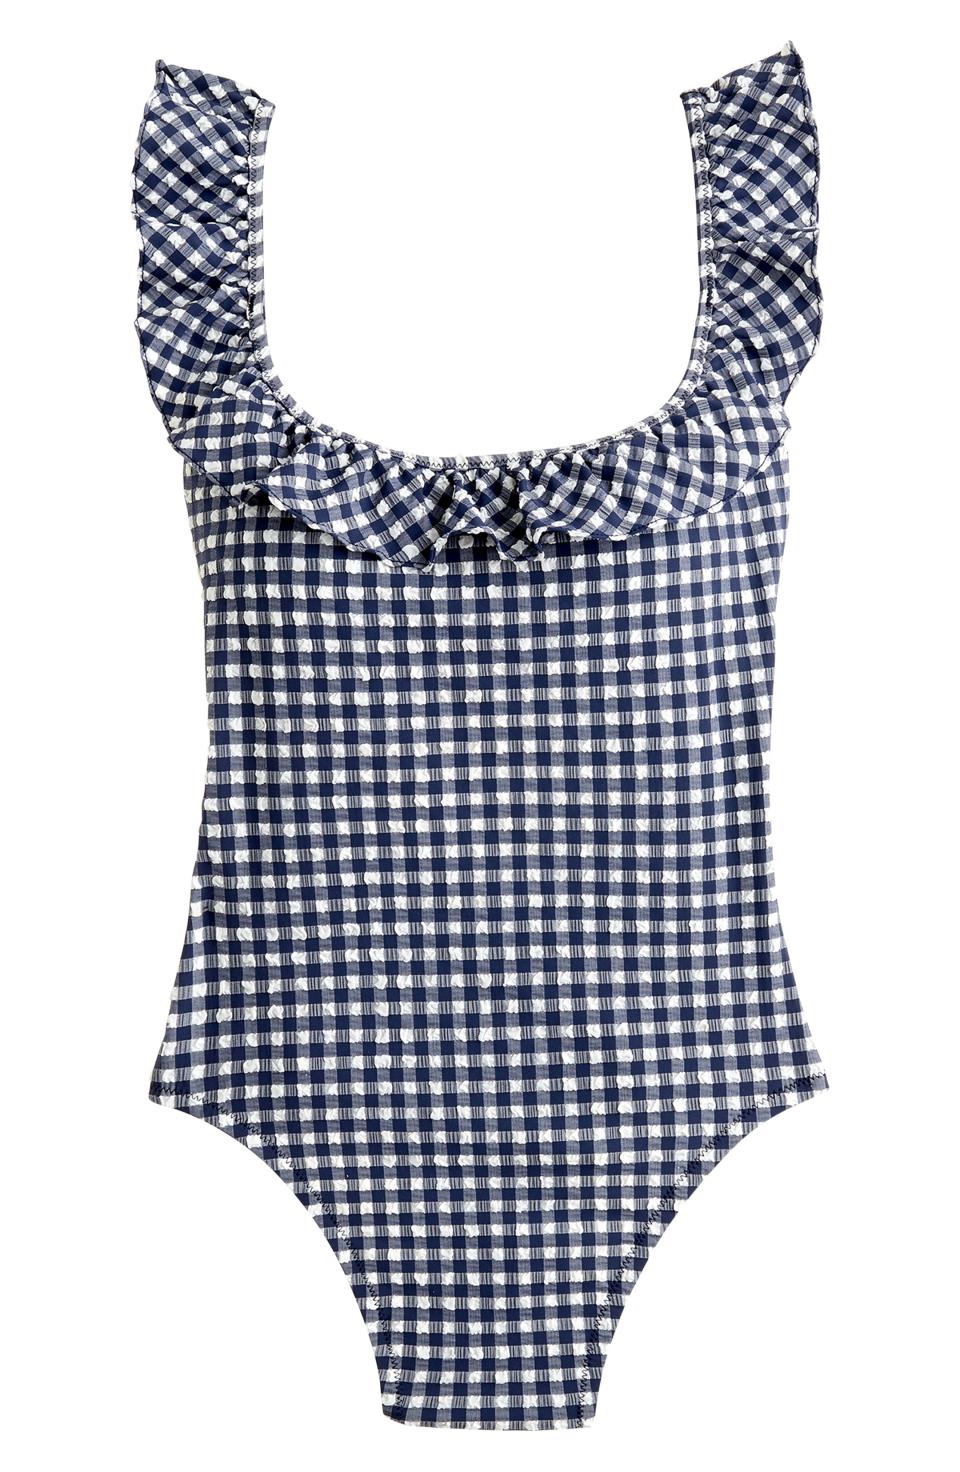 Puckered Gingham Ruffle One-Piece Swimsuit